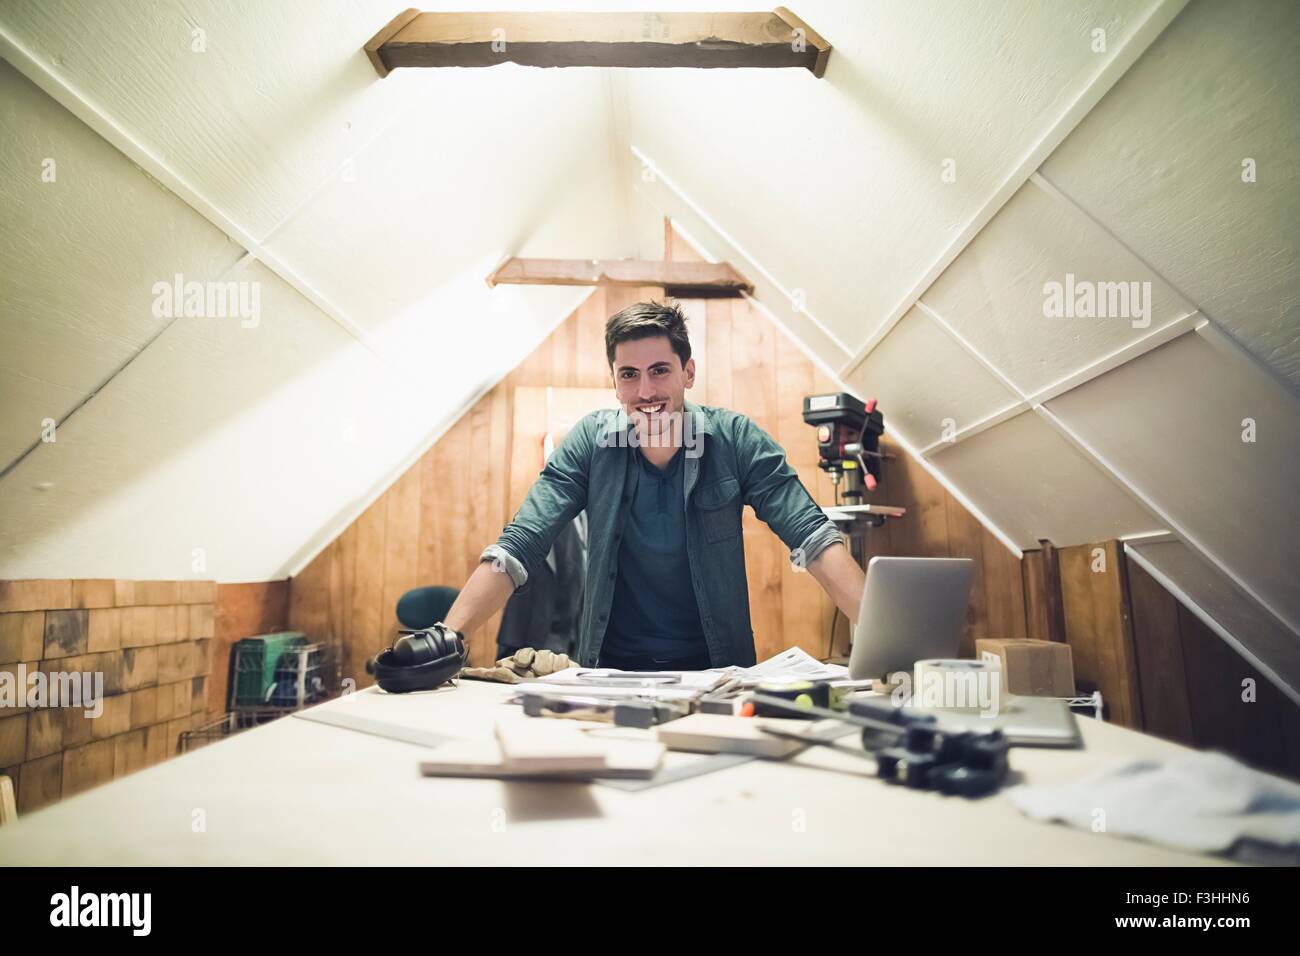 Young man leaning against desk in workshop looking at camera smiling Stock Photo